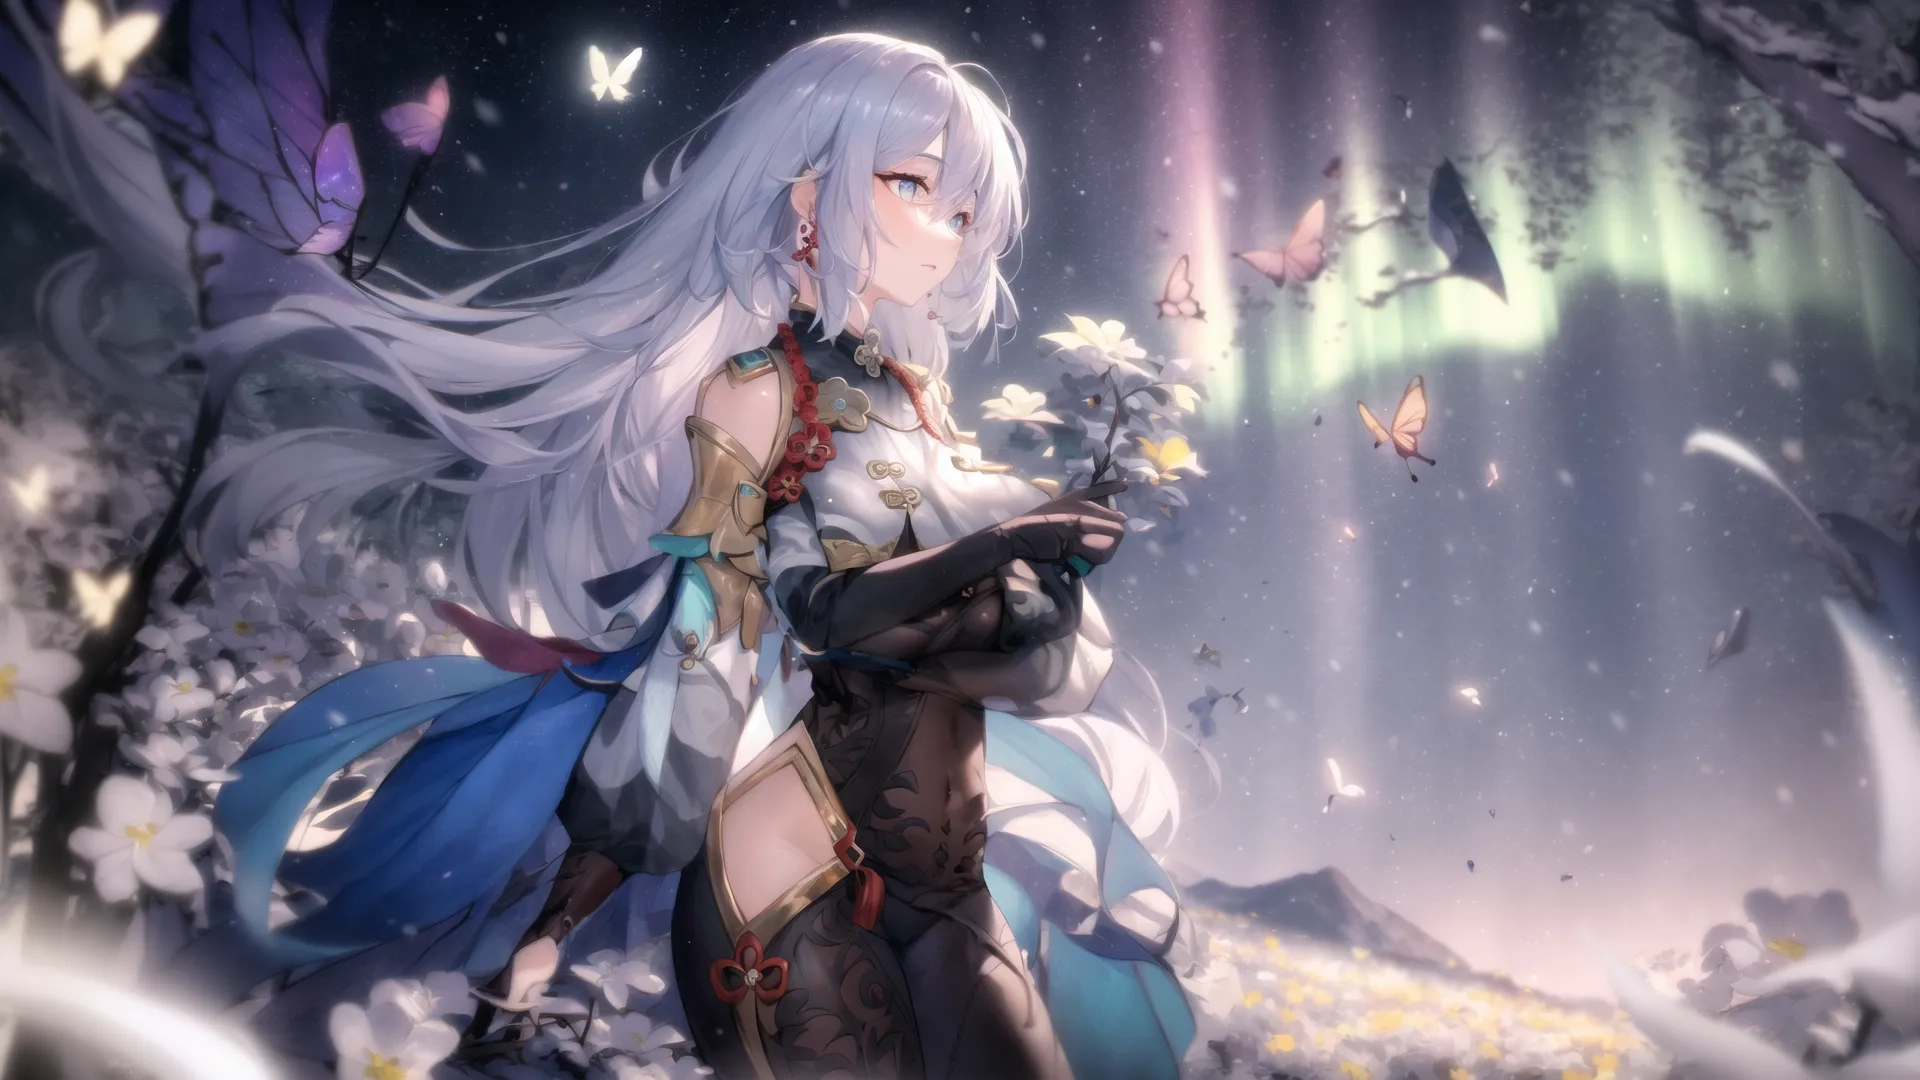 an anime character with long white hair on a horse near flowers and birds in the snow, on top of a mountain landscape with trees and hills
